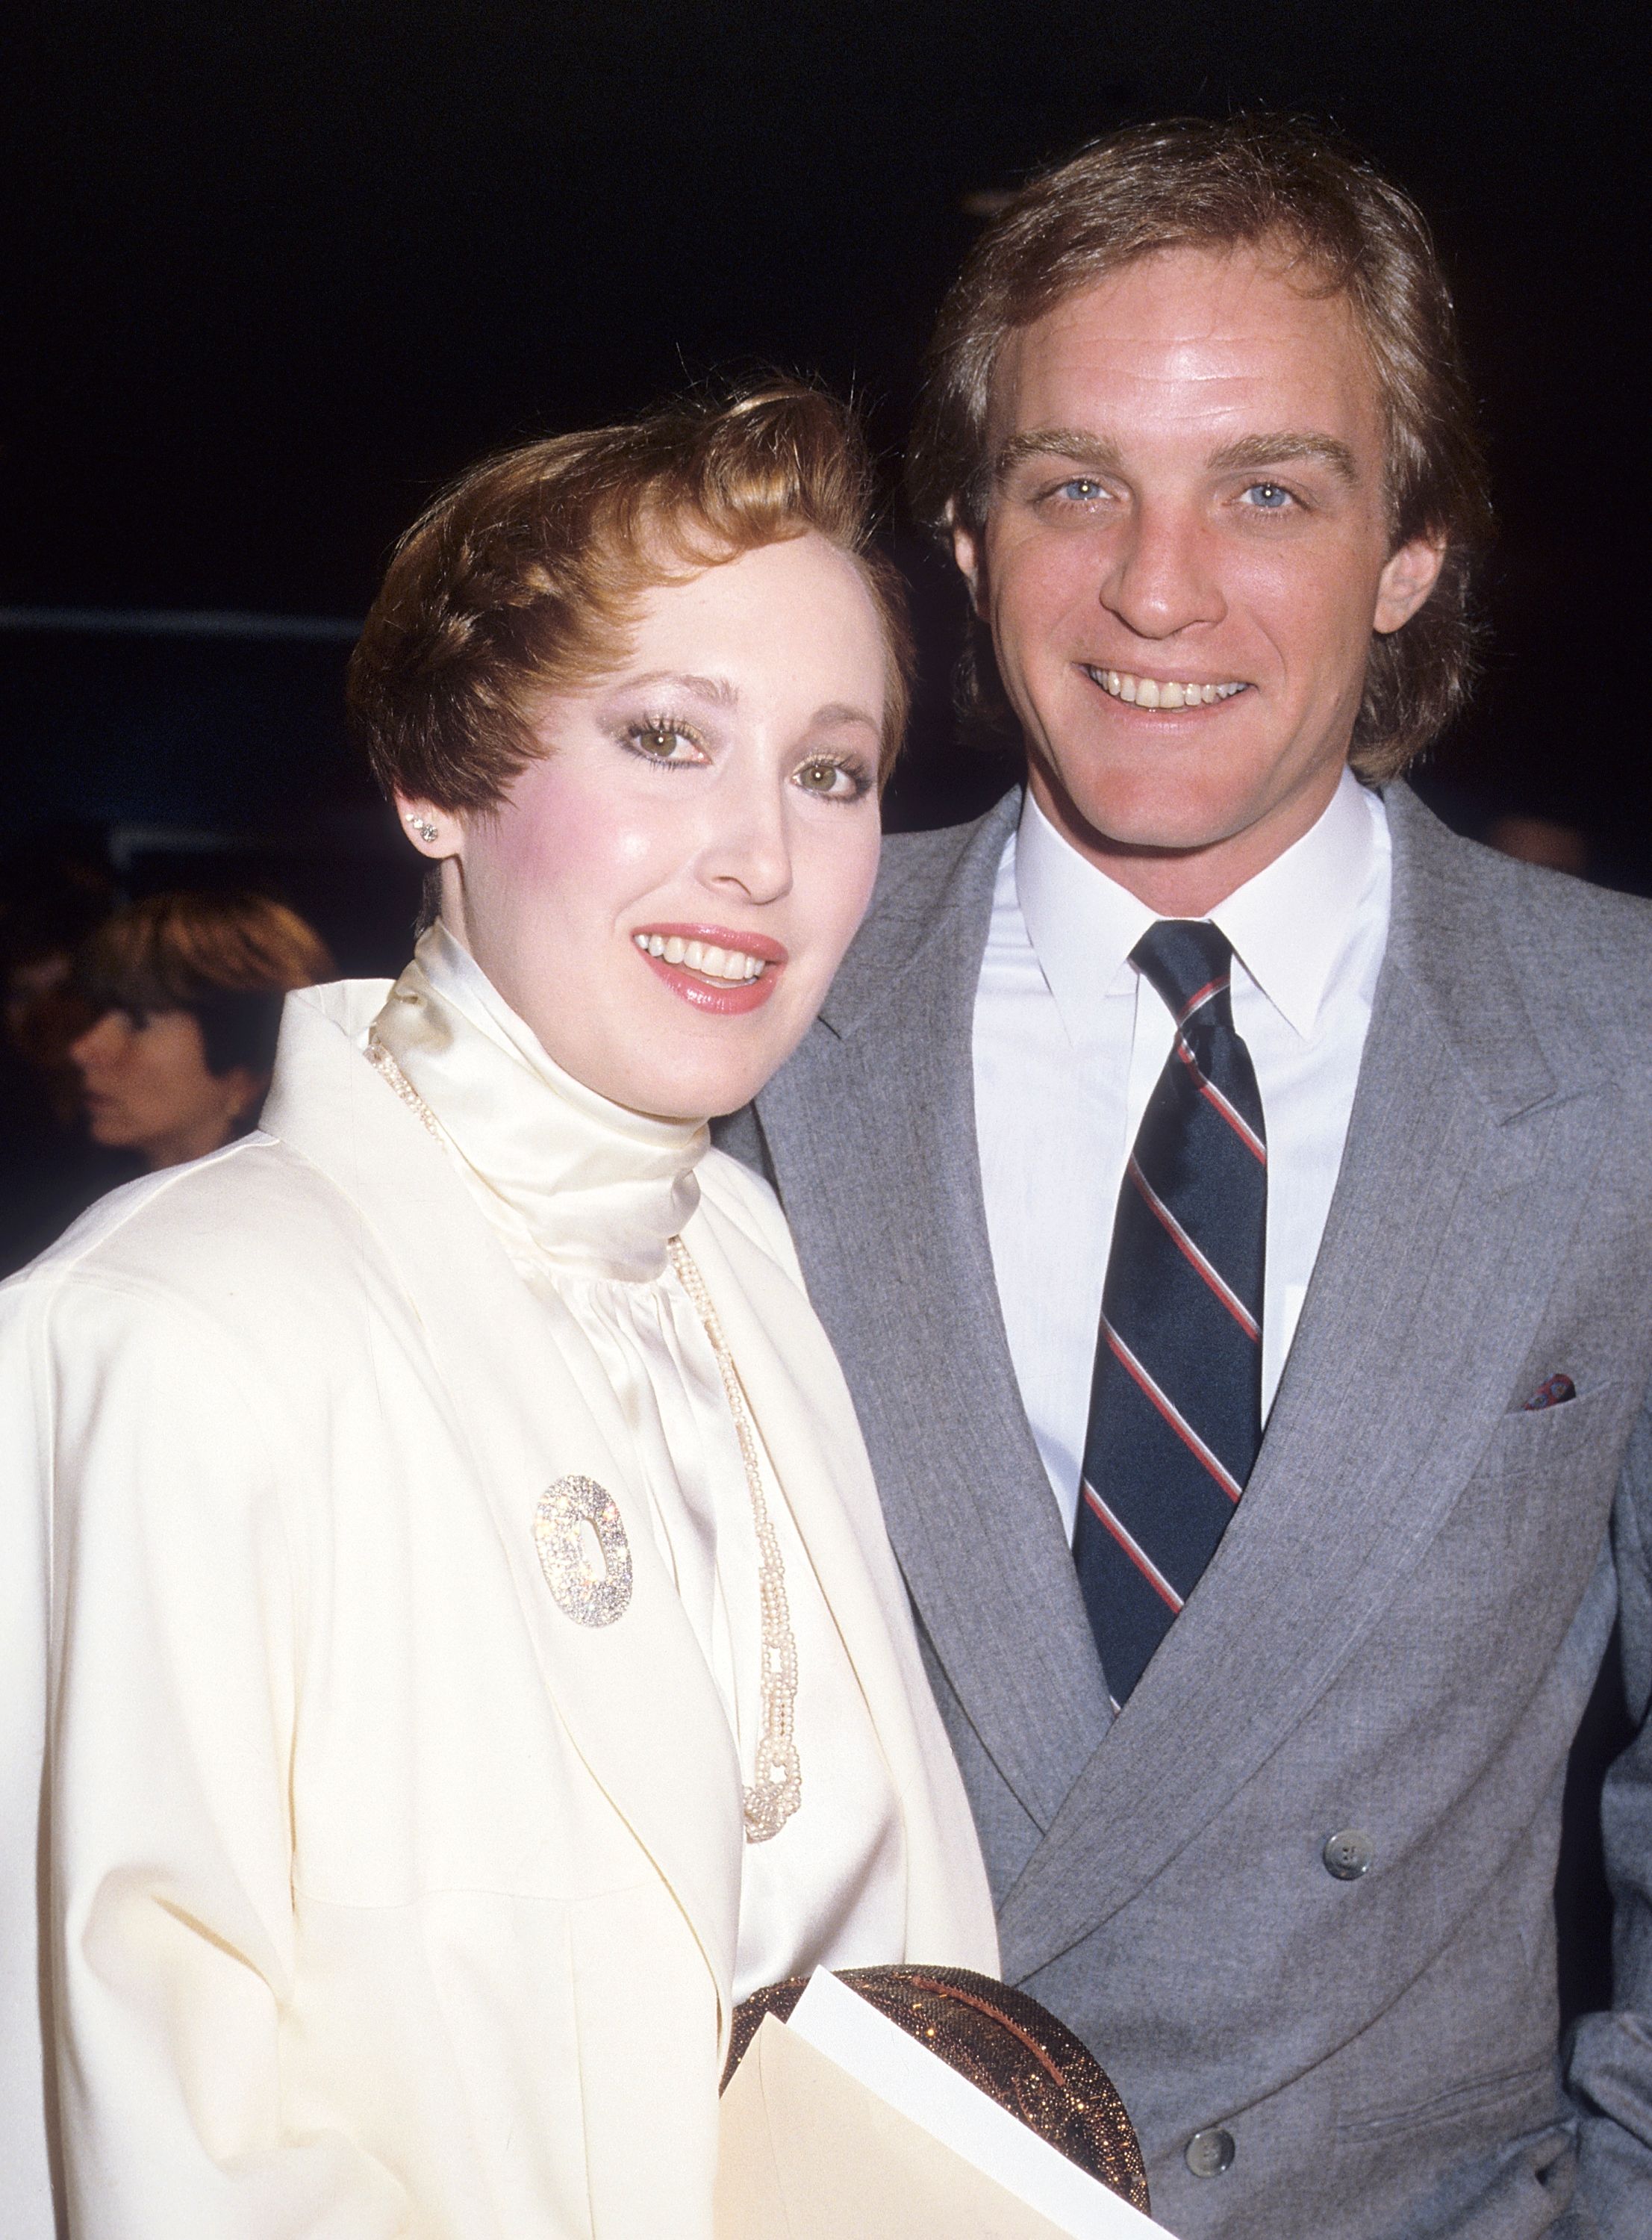 Terry Lester and Susan Newman during the "Out of Africa" Century City Premiere on December 10, 1985 at Plitt's Century Plaza Theatres in Century City, California. | Source: Getty Images